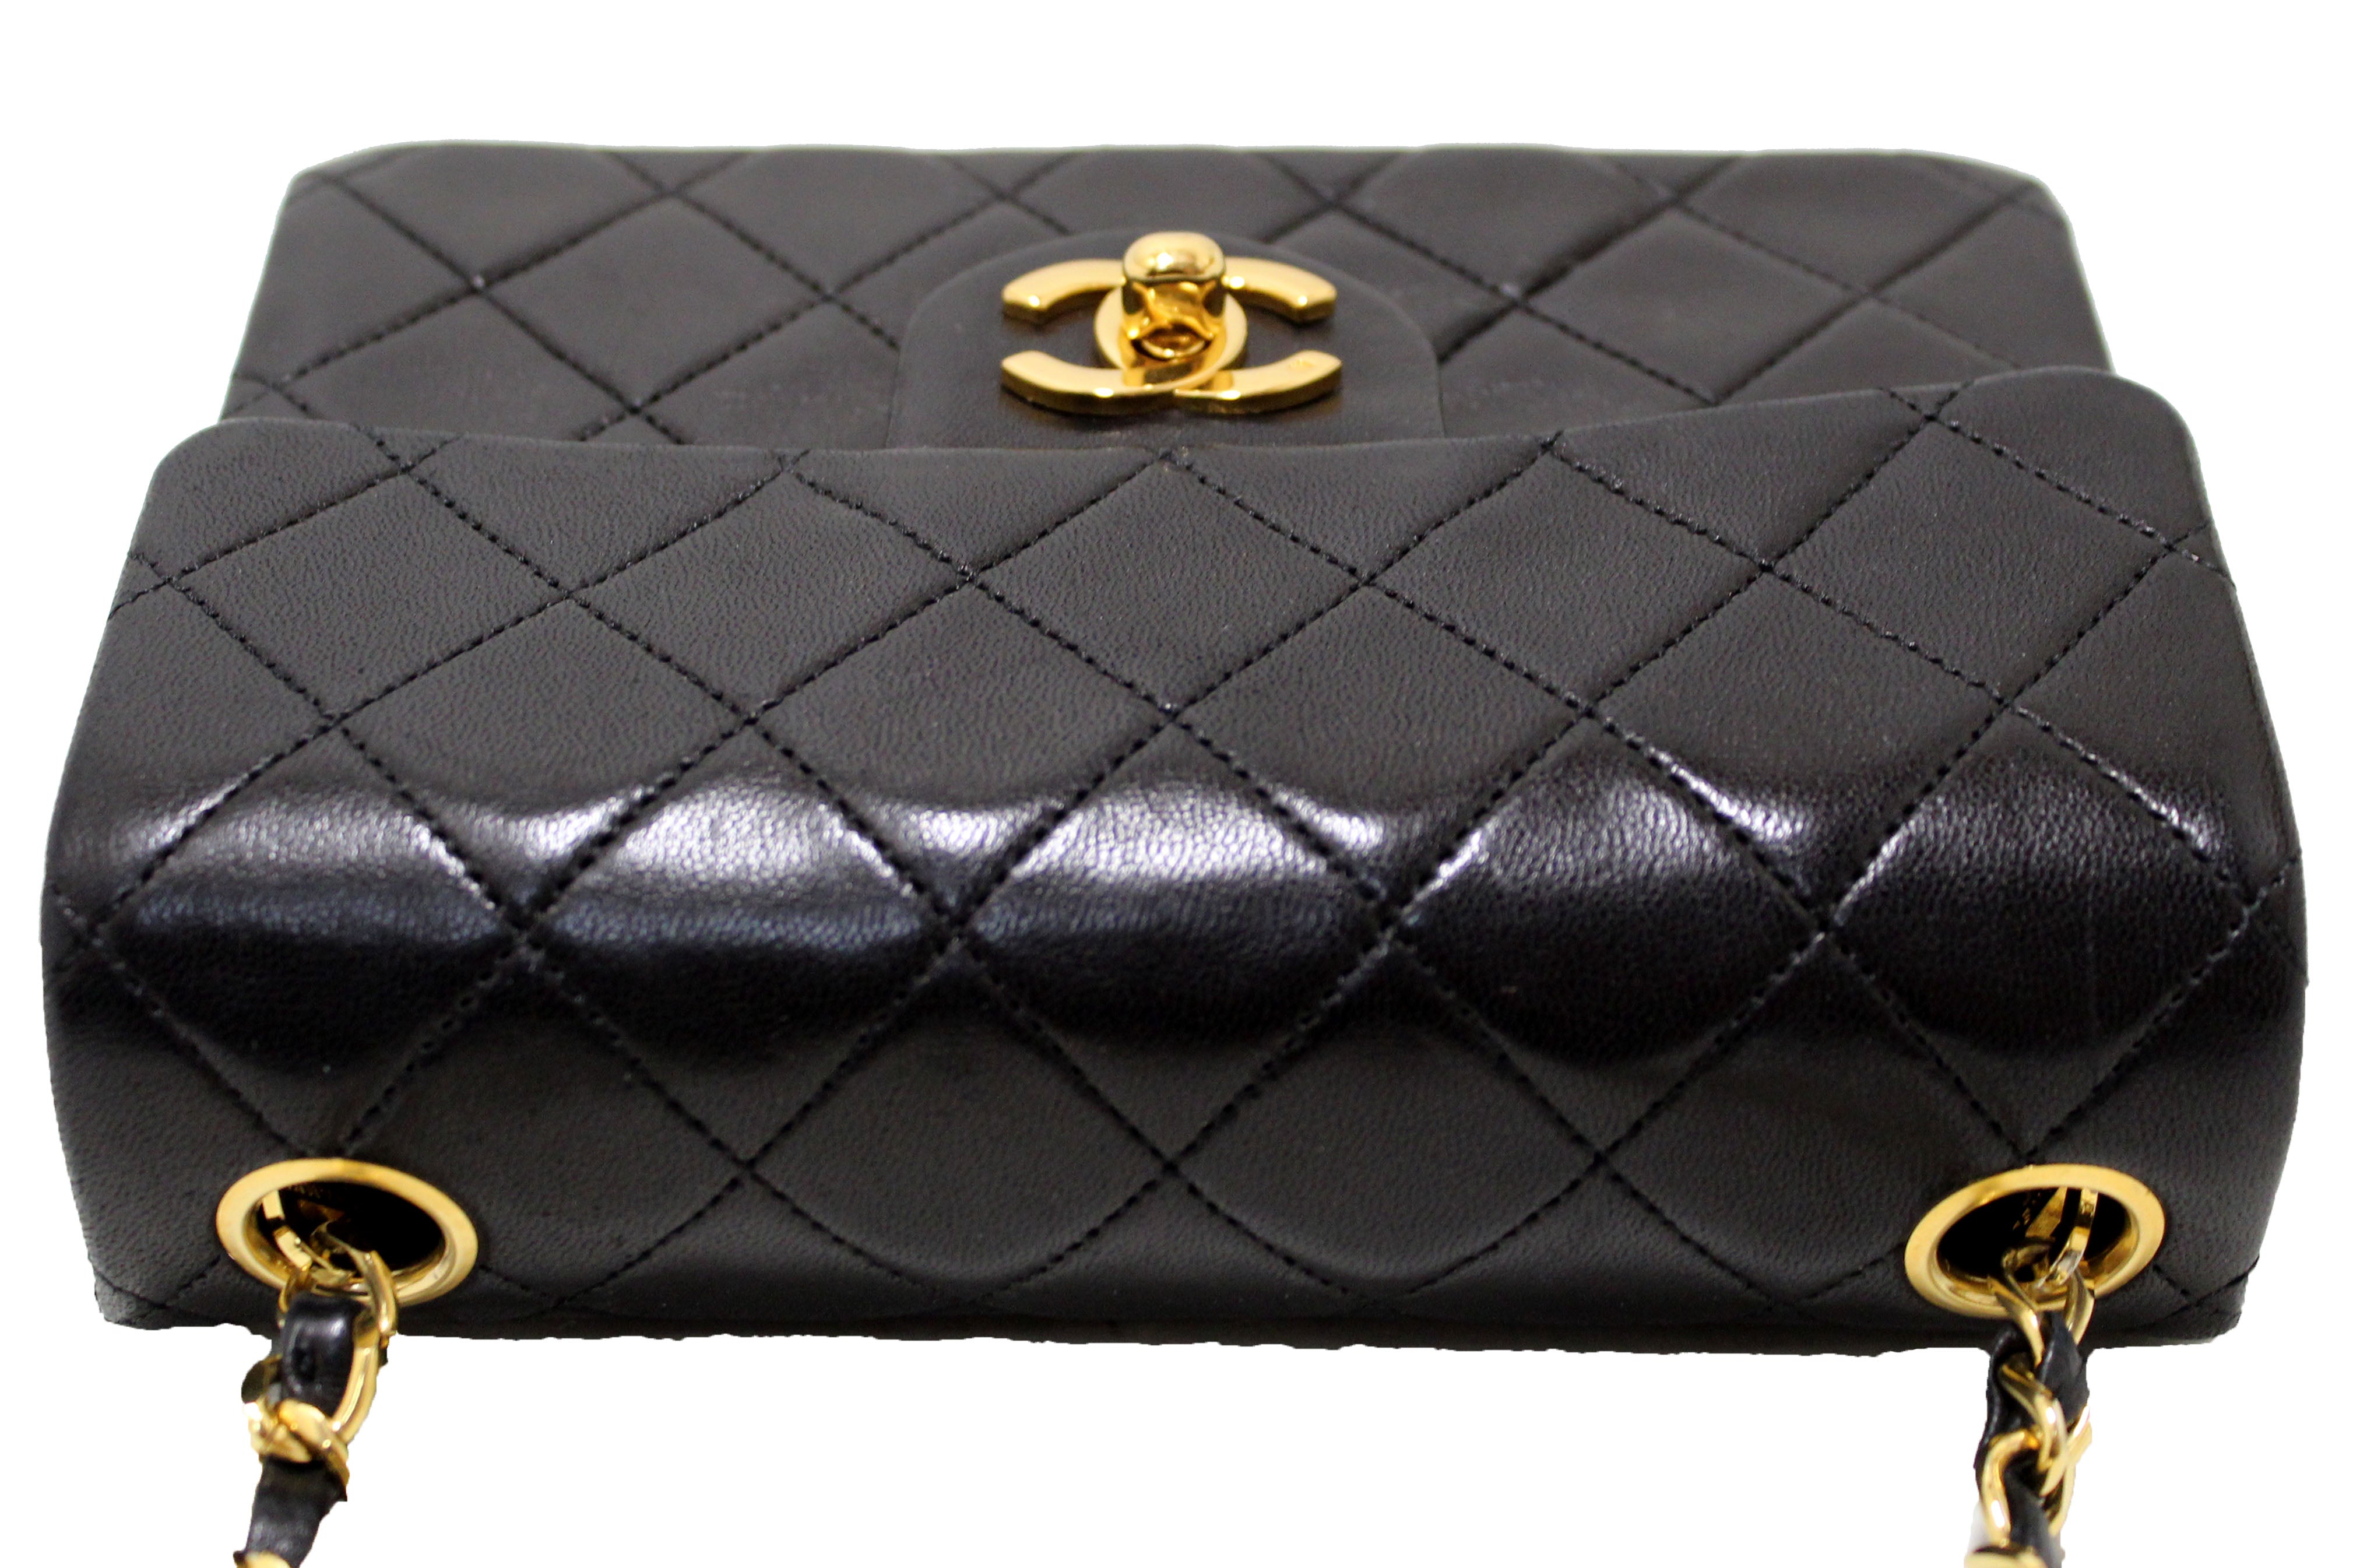 Authentic Chanel Vintage Black Quilted Lambskin Leather Classic Mini Square Flap Bag